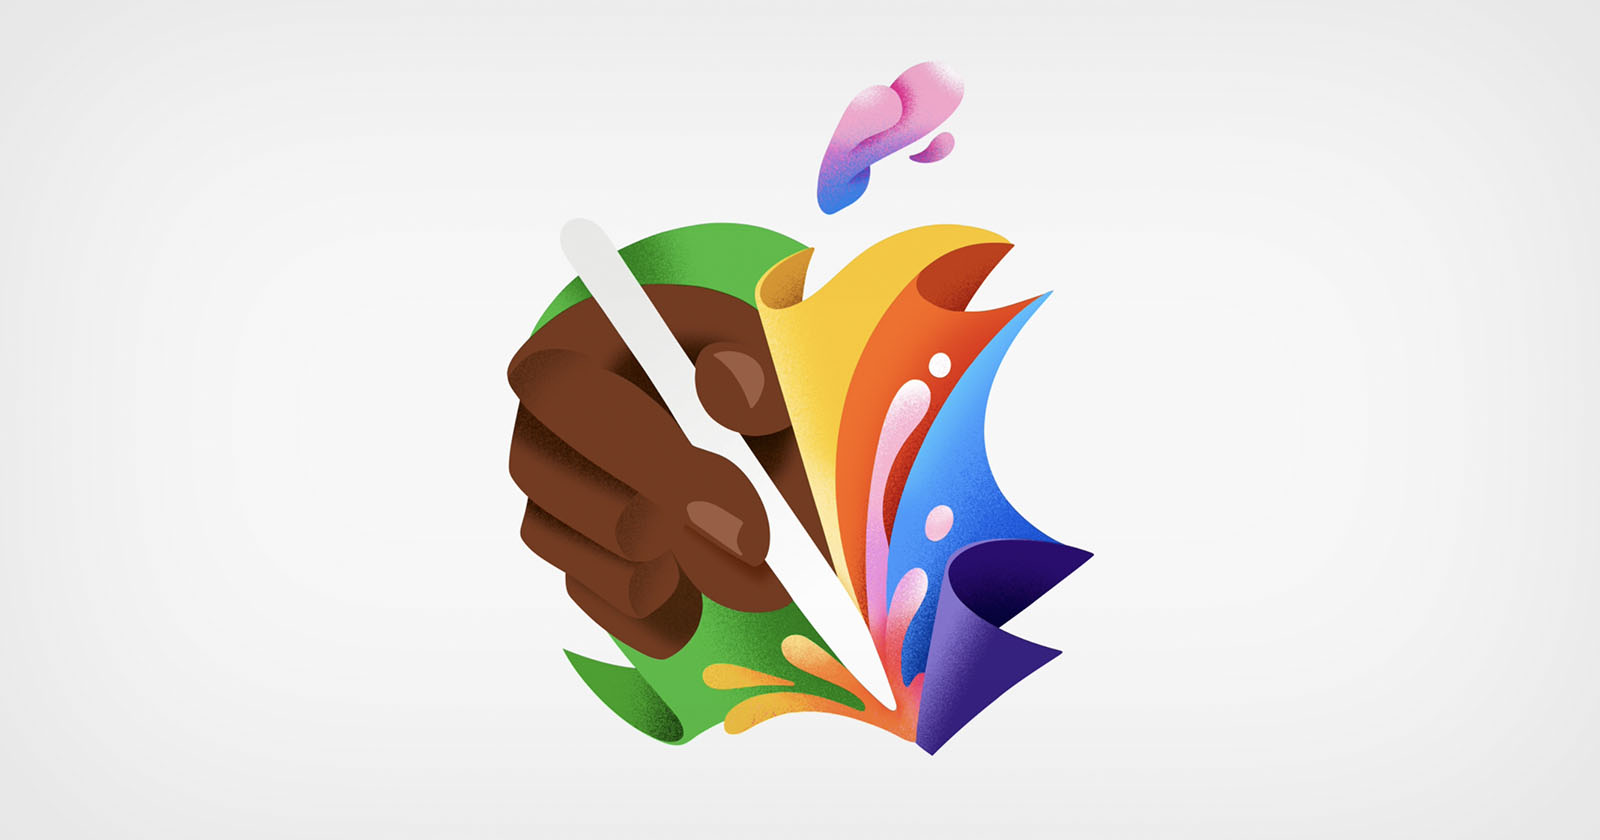 A stylized graphic of a dark-skinned hand holding a paintbrush with vibrant, colorful paint strokes emanating from the brush, forming an abstract, dynamic splash.